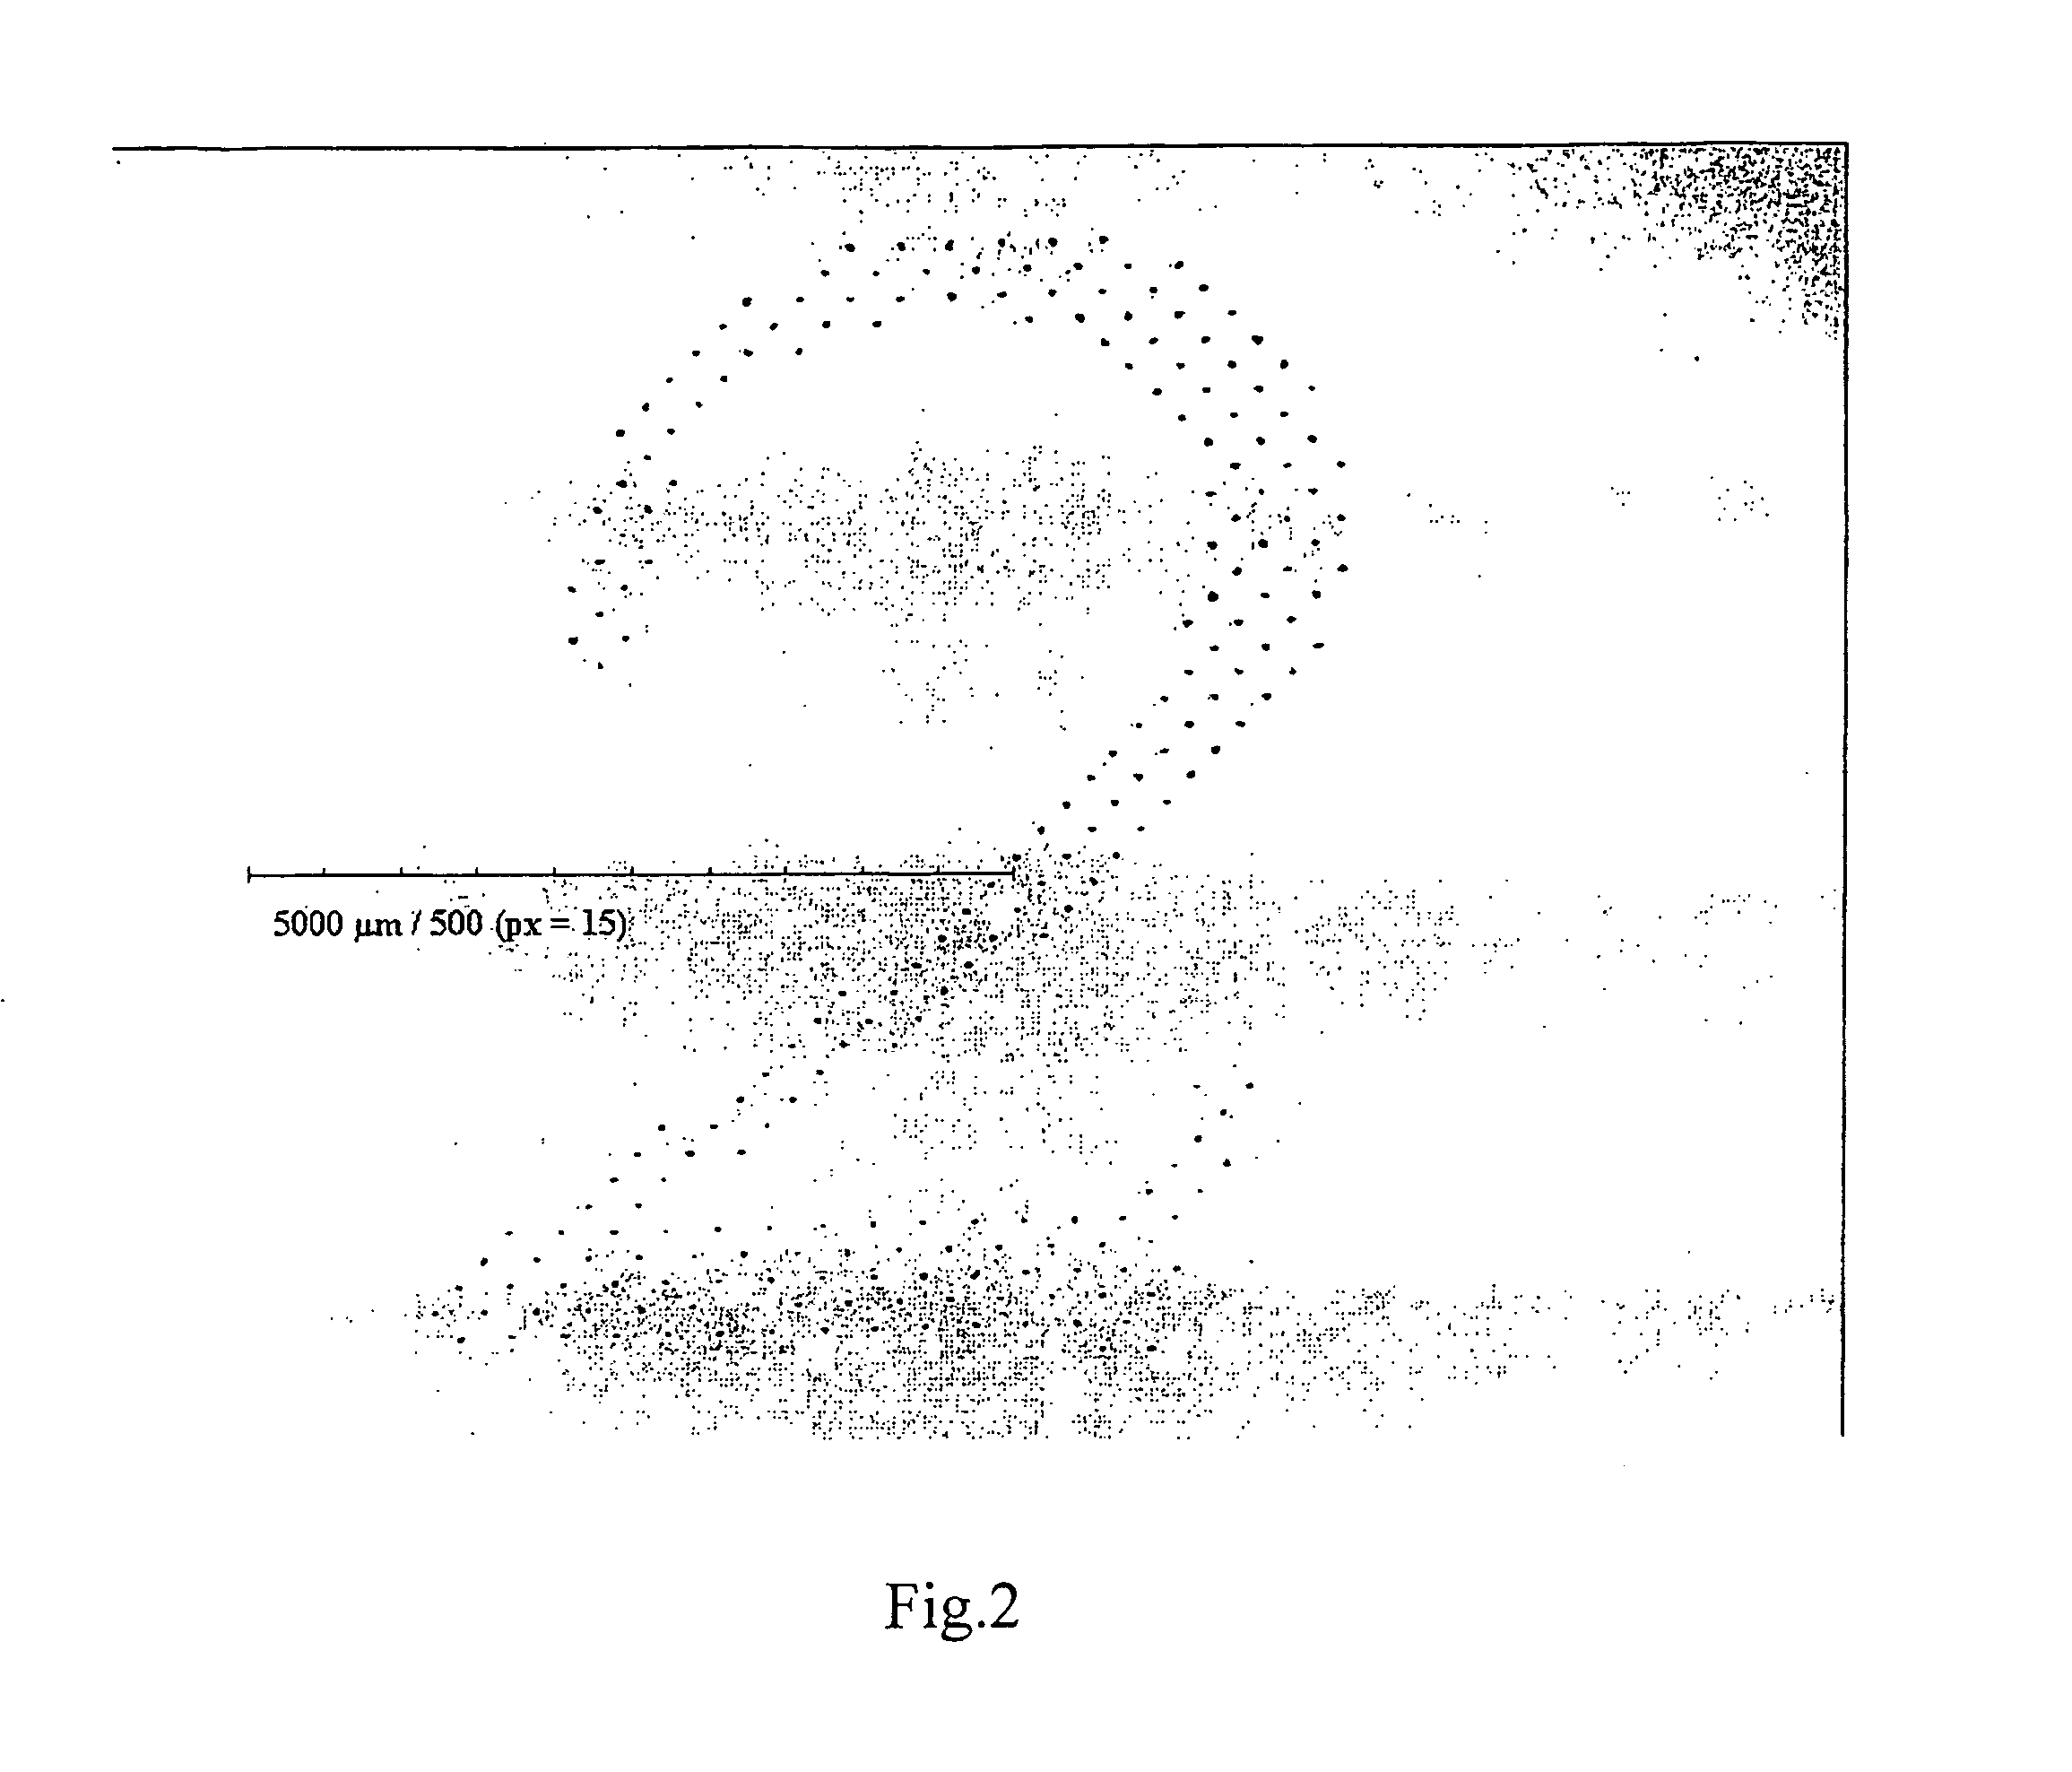 Print Substrate with a Scrambling Pattern for Concealing a Confidential Information Sequence